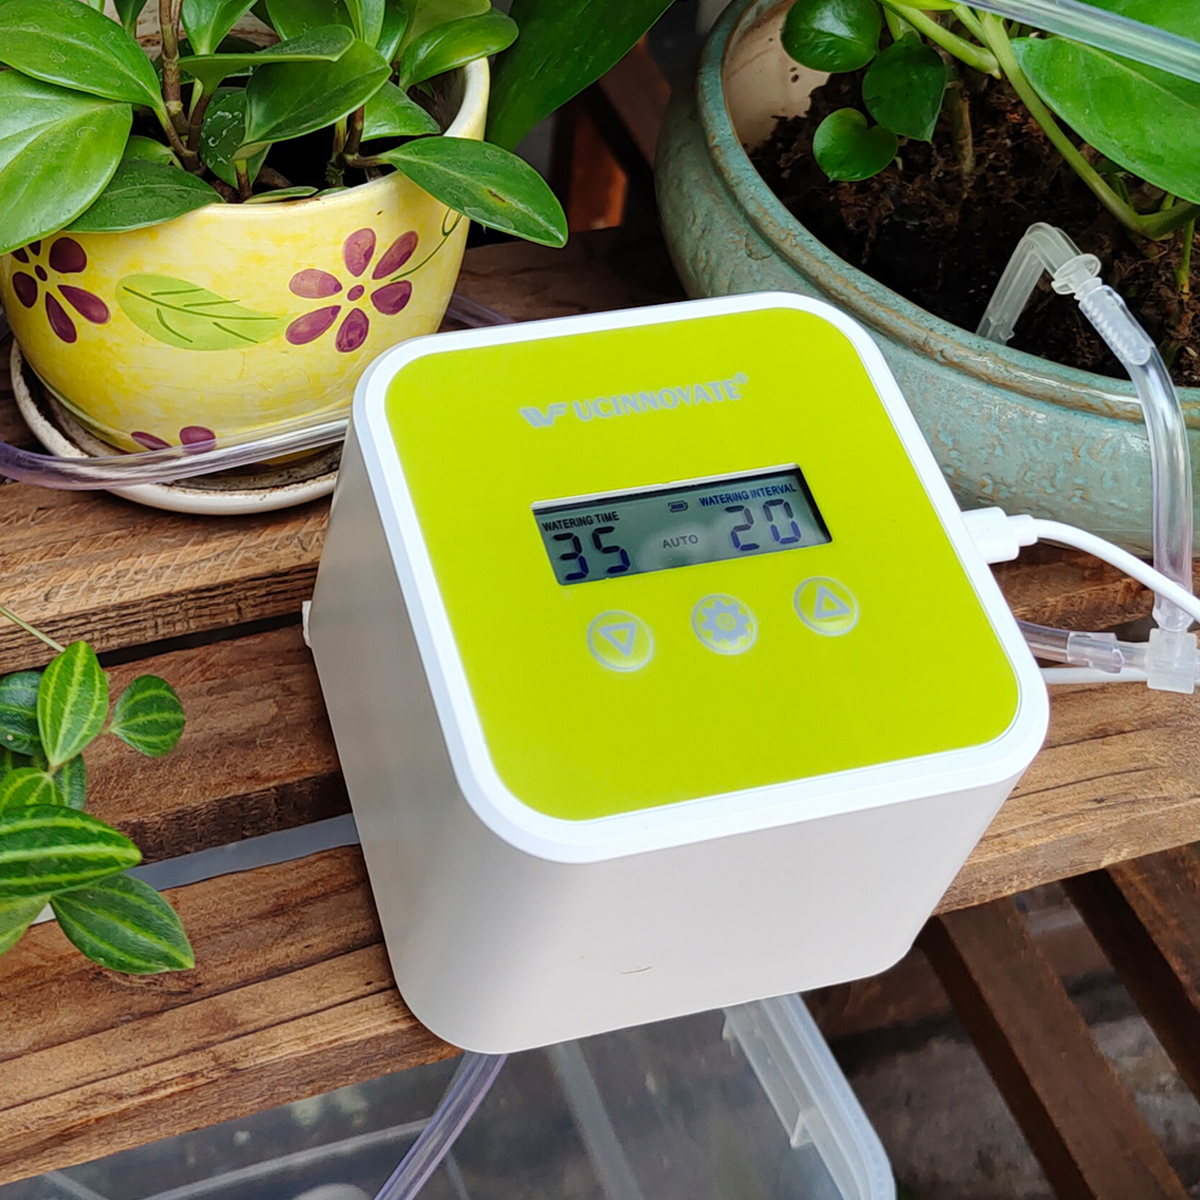 Automatic Drip Irrigation Kit, Indoor Plants Self Watering System with Watering Timer,Watering Equipment for Potted Plants